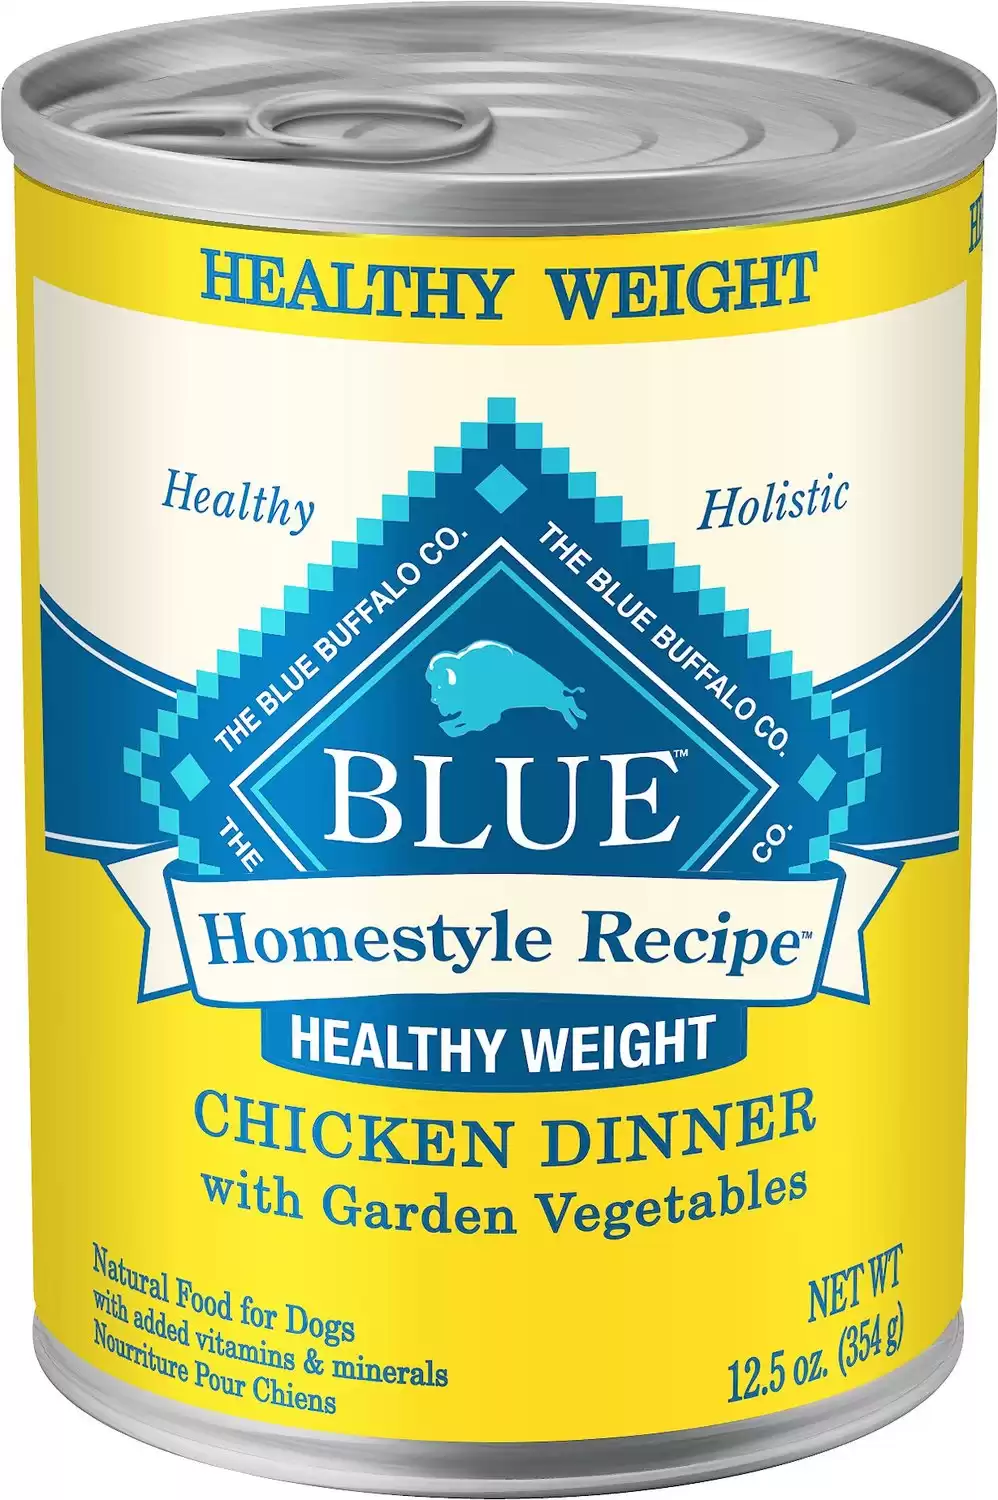 Blue Buffalo Homestyle Recipe Healthy Weight Chicken Dinner with Garden Vegetables & Brown Rice Canned Dog Food